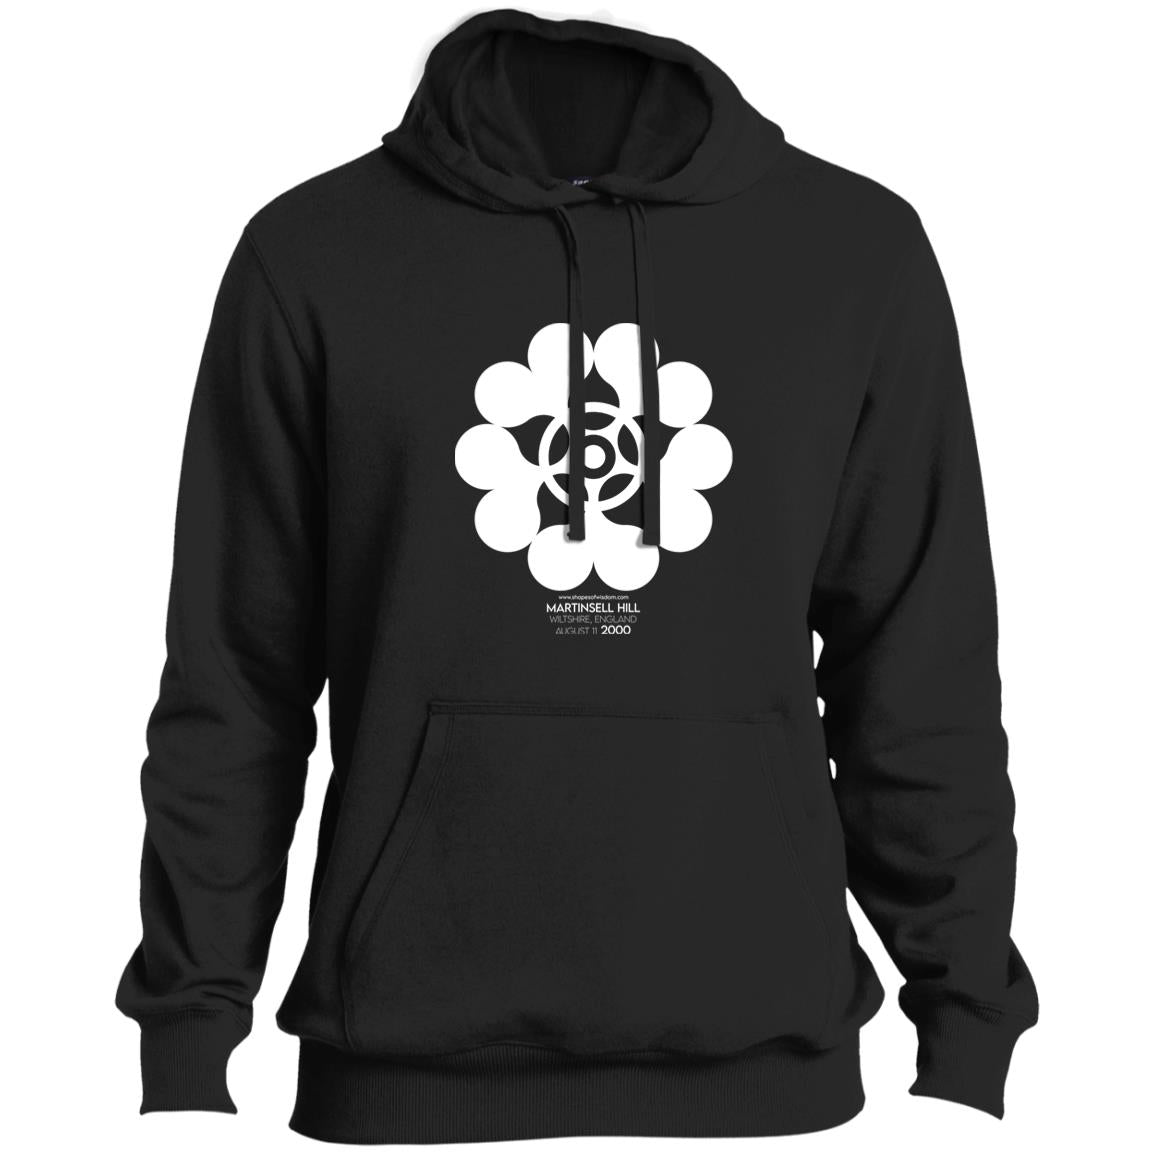 Crop Circle Pullover Hoodie - Martinsell Hill 2